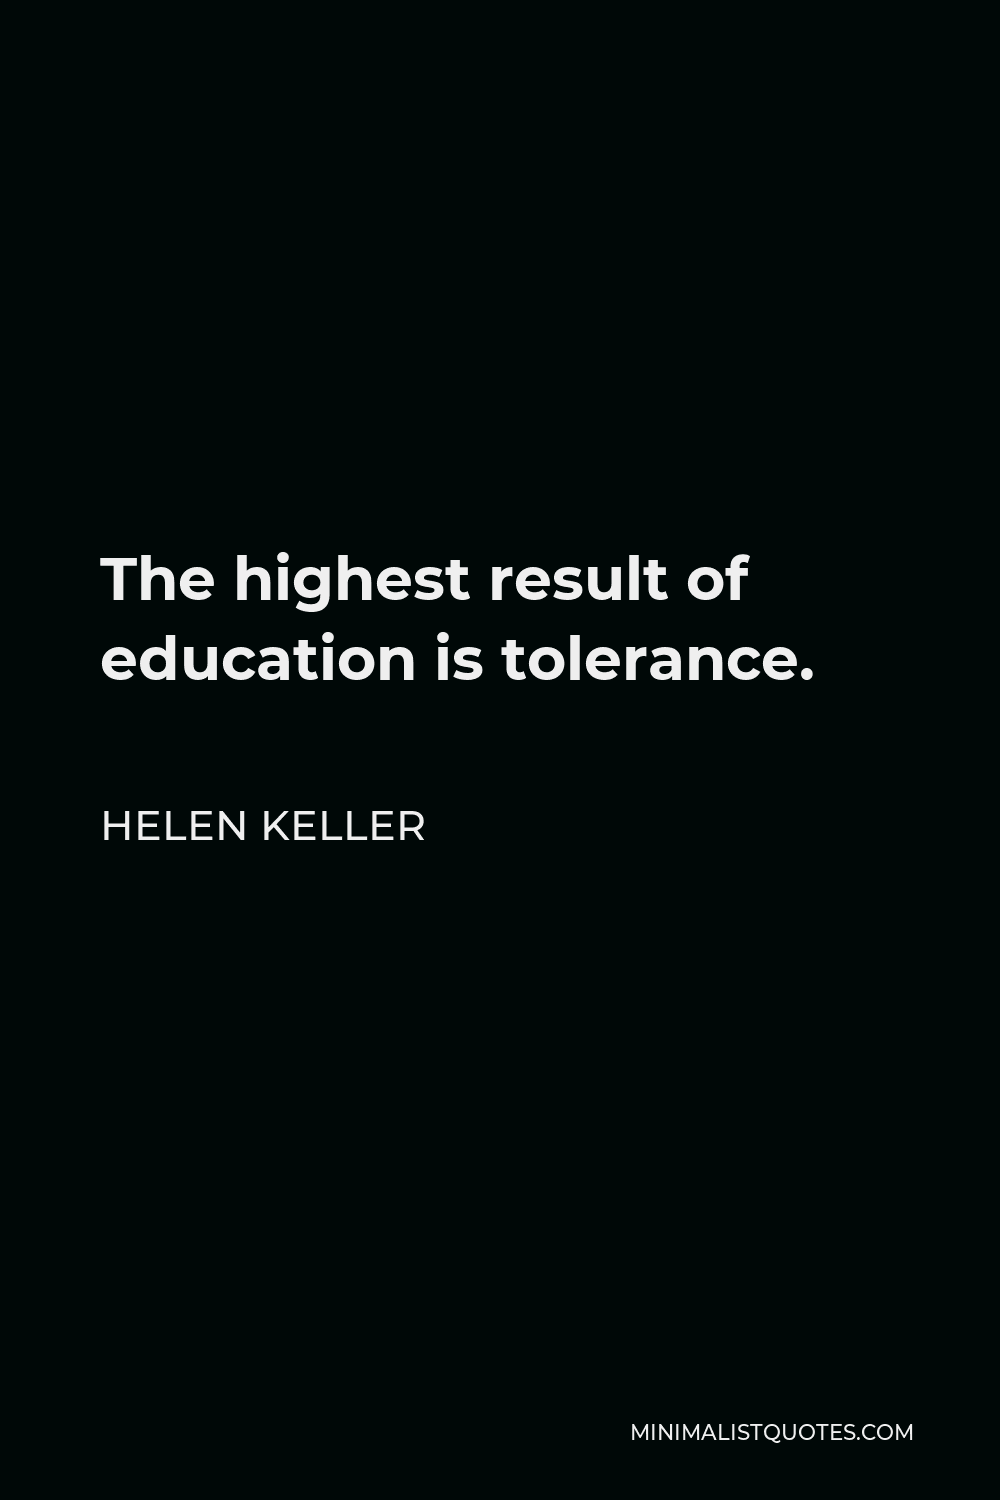 Helen Keller Quote - The highest result of education is tolerance.